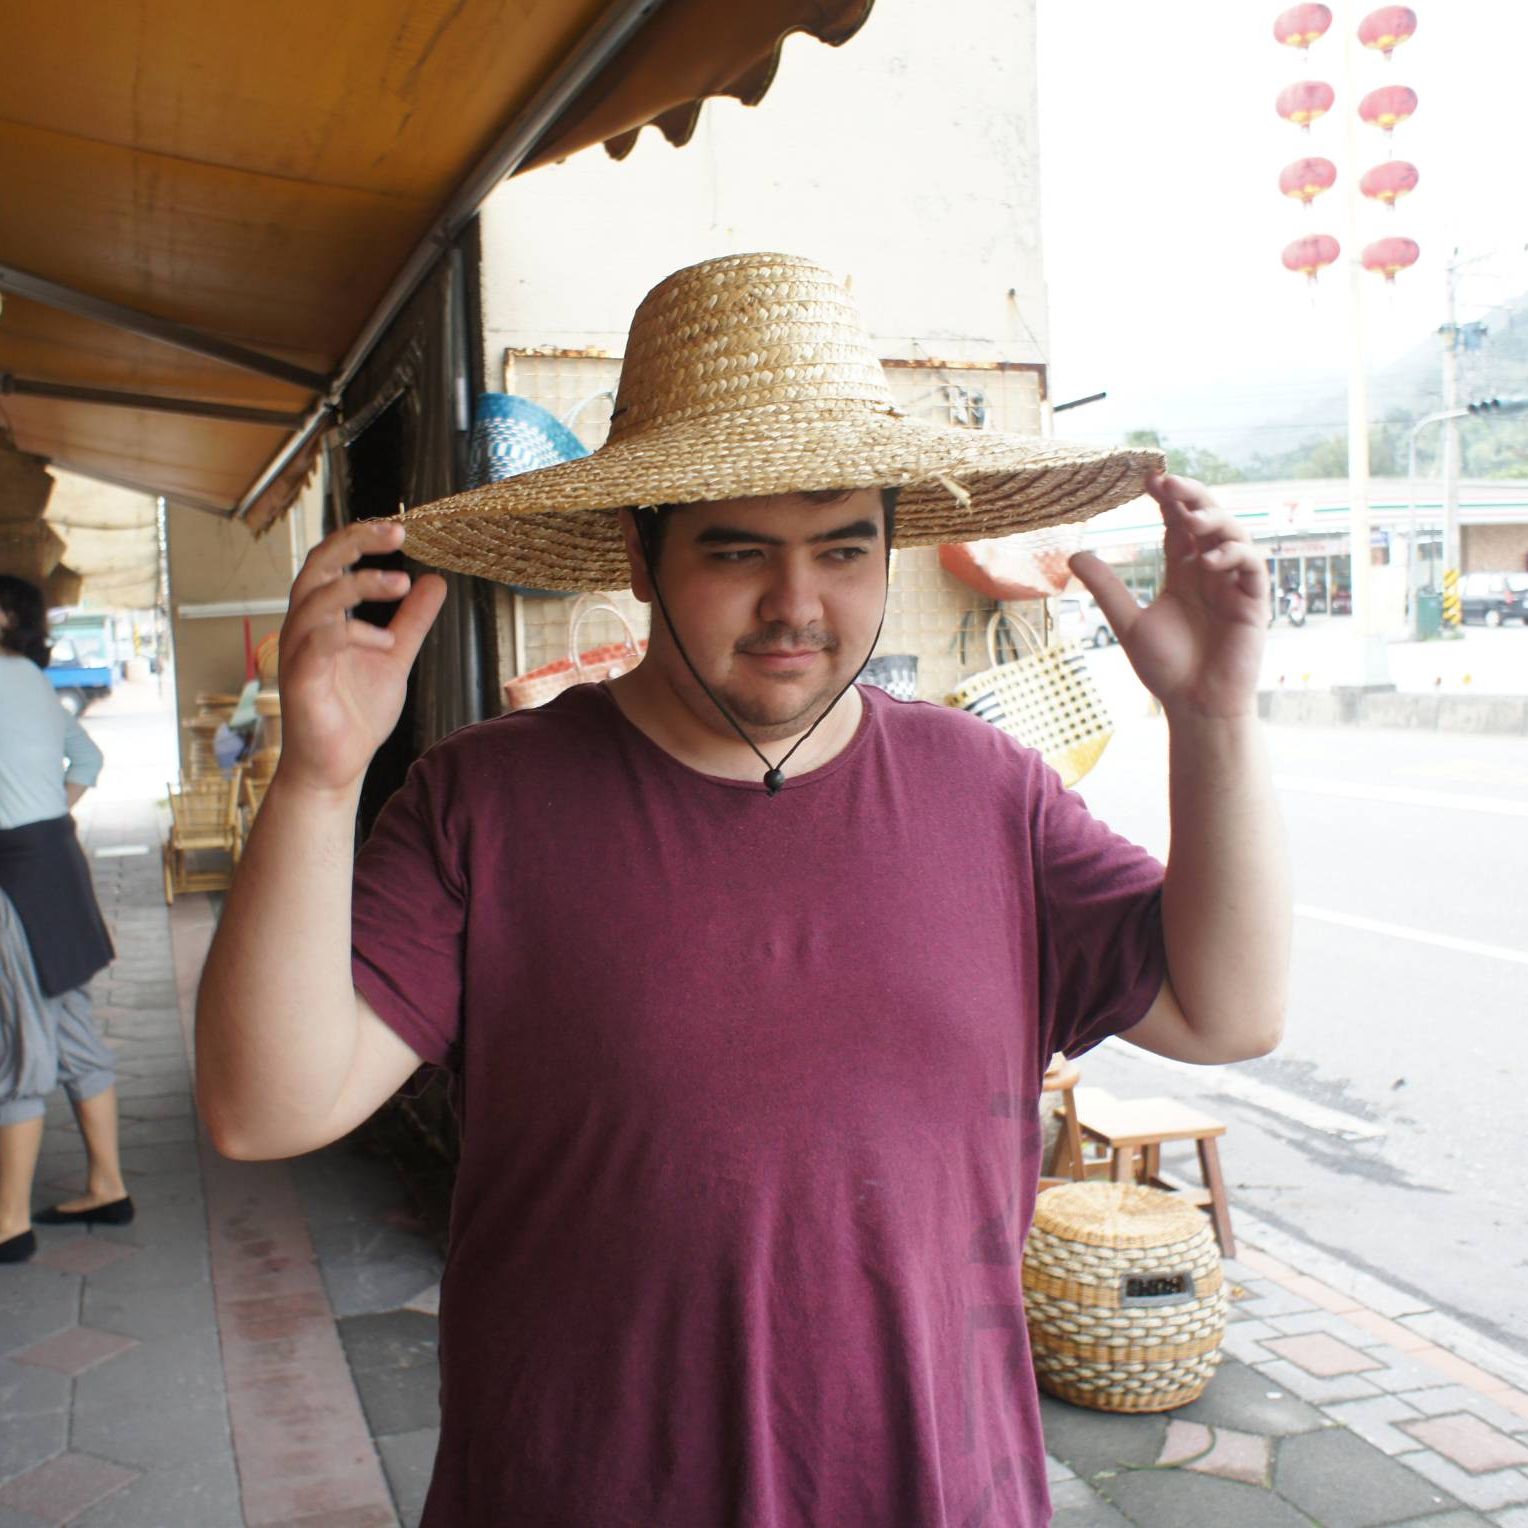 A photograph of former student Dorian Chou with a huge hat on his head